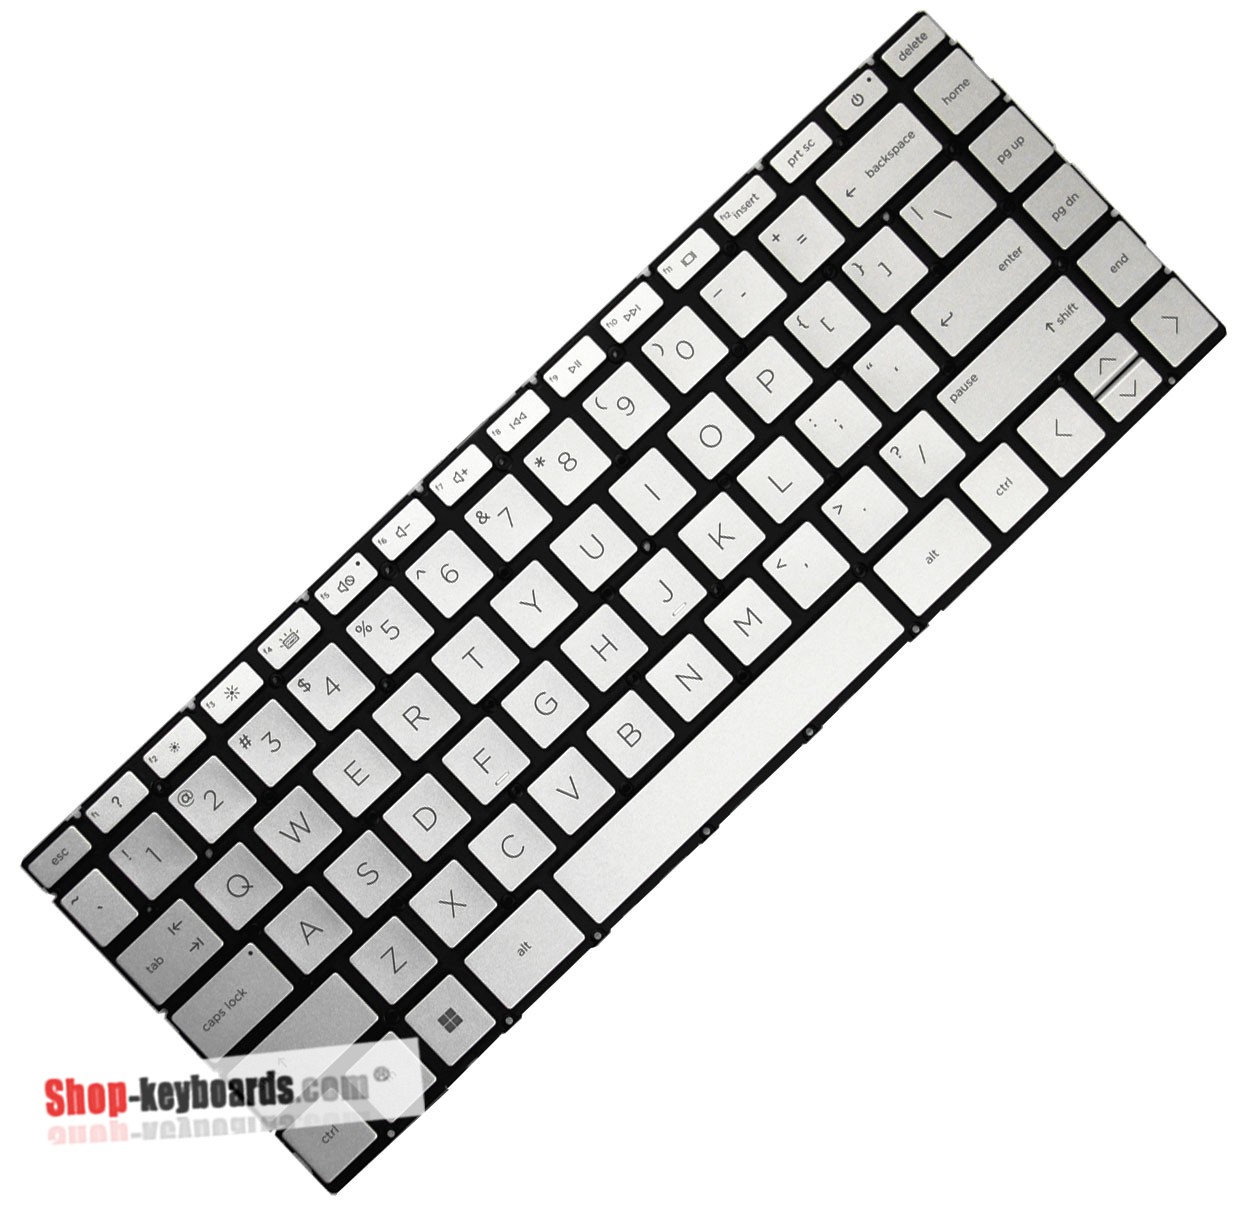 HP SG-A8630-XIA Keyboard replacement